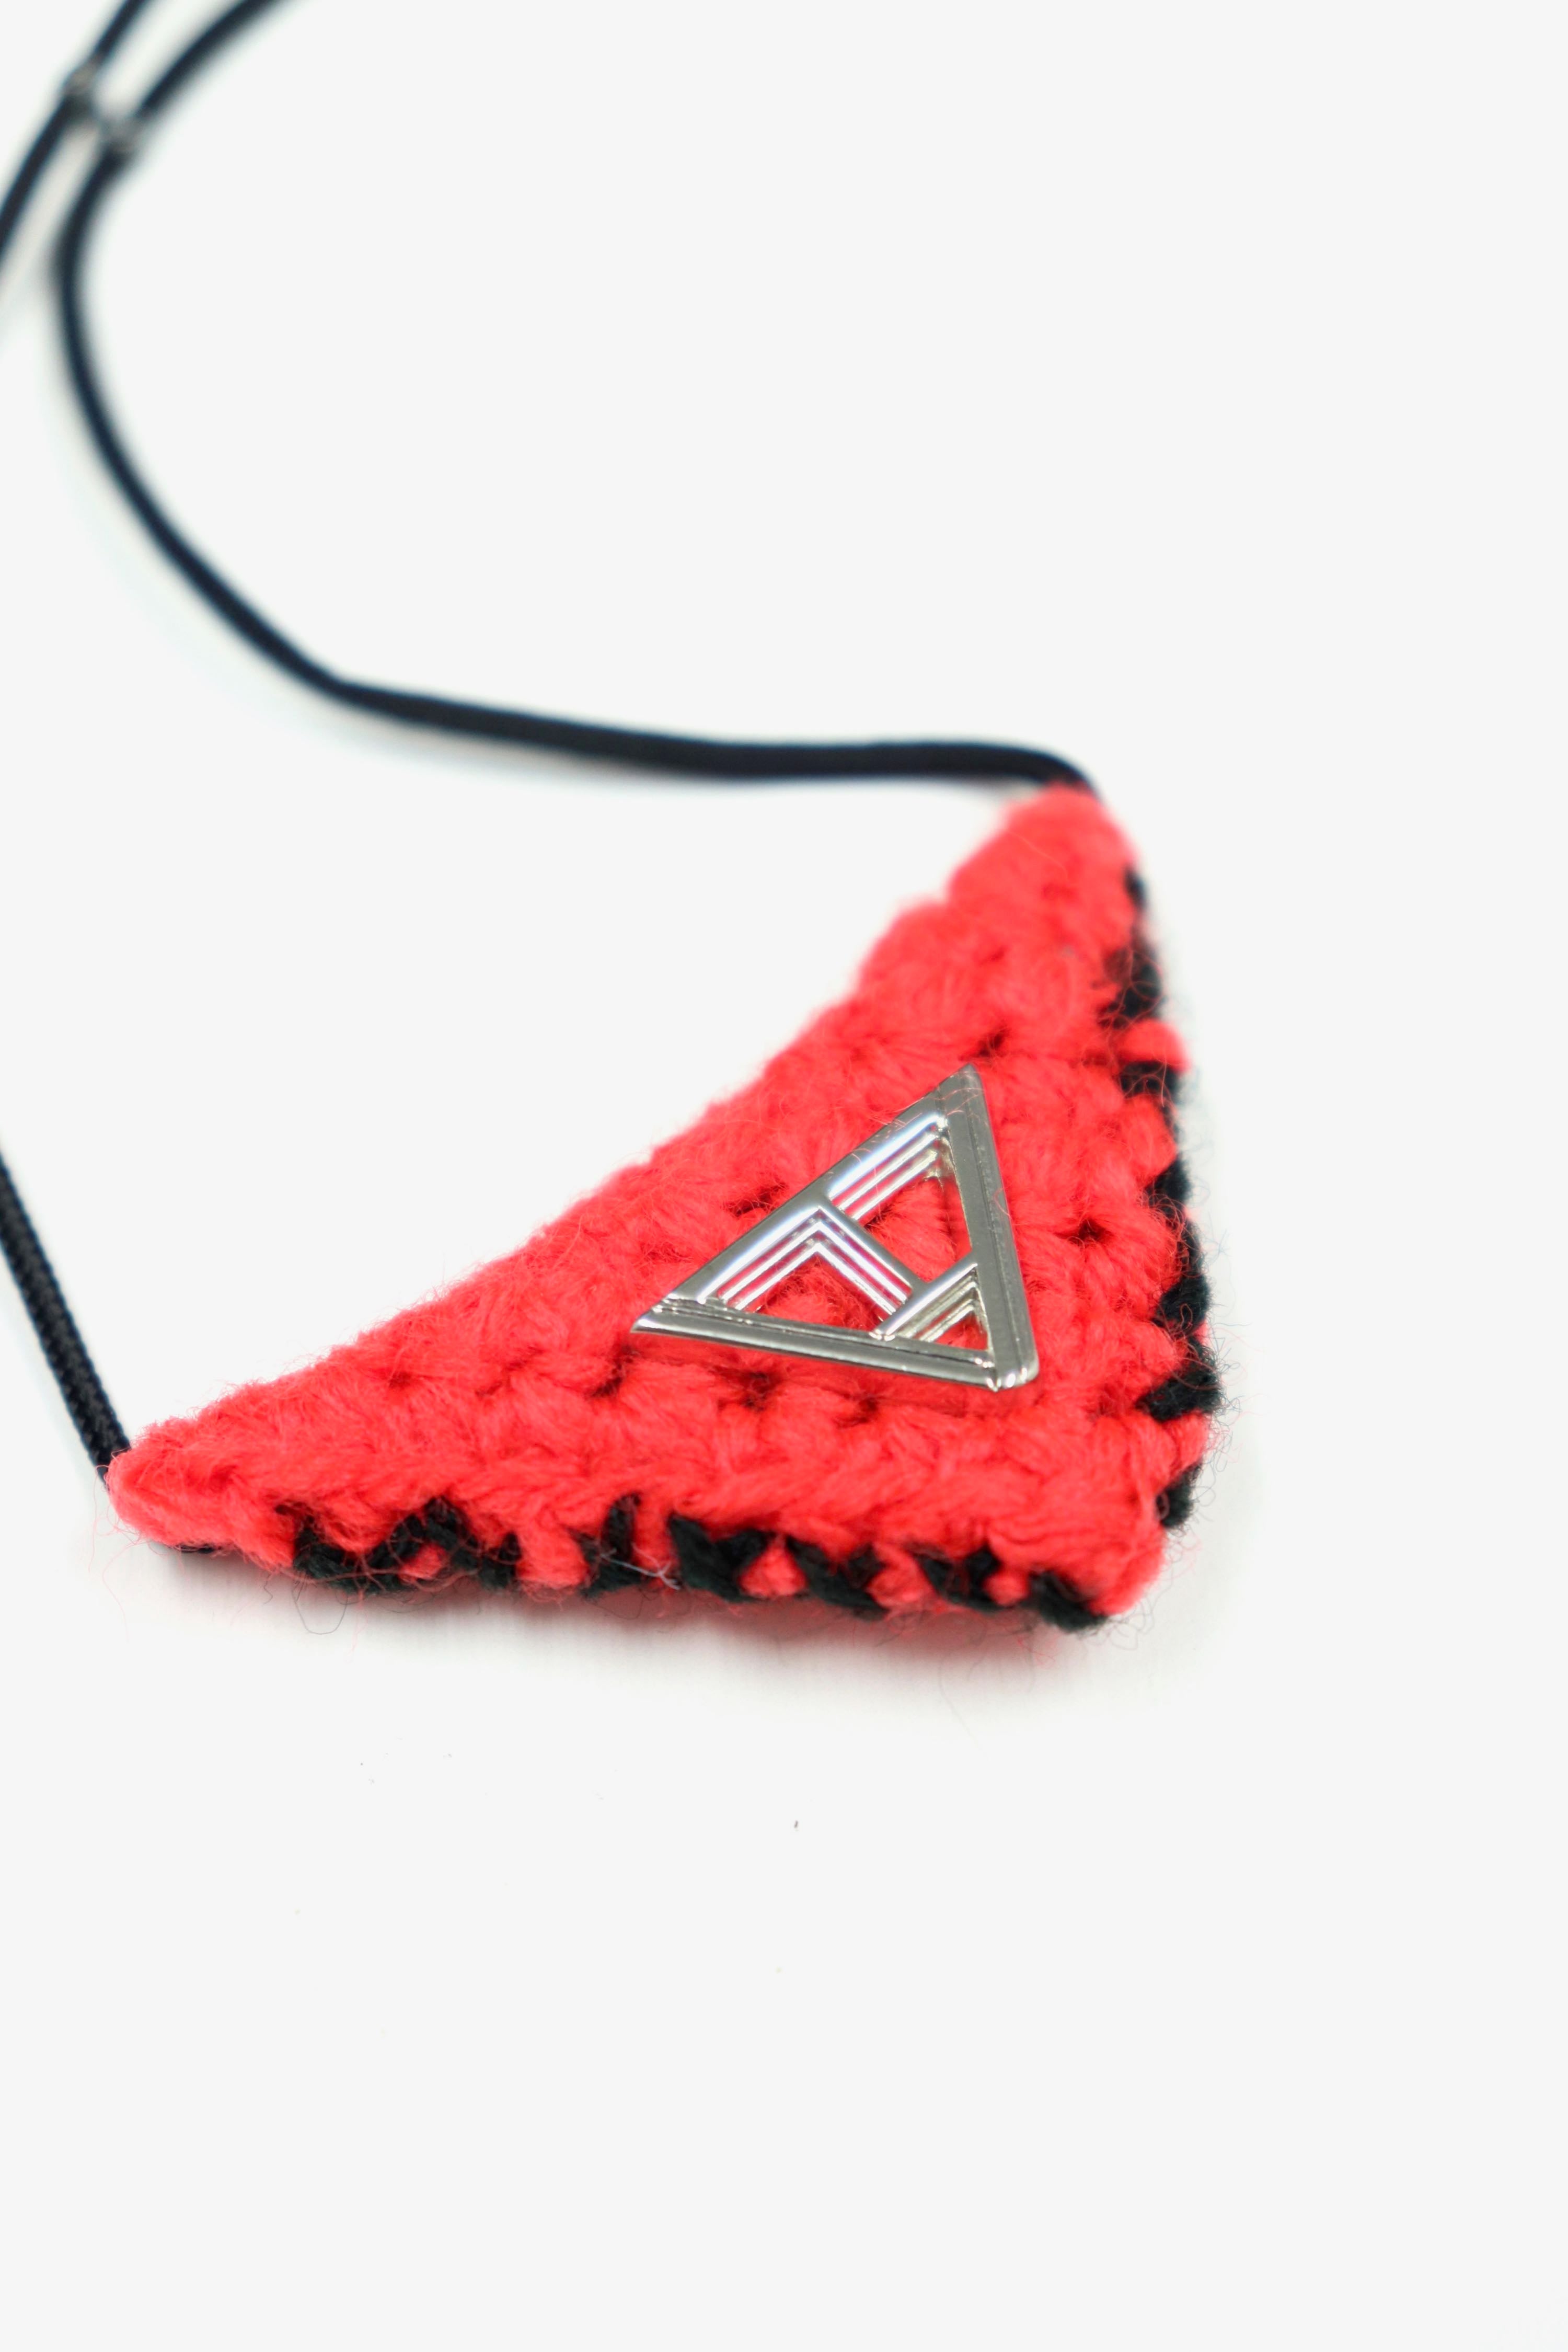 Magic Triangle Small Red's Mail Order of Toga Virilis | Palette Art